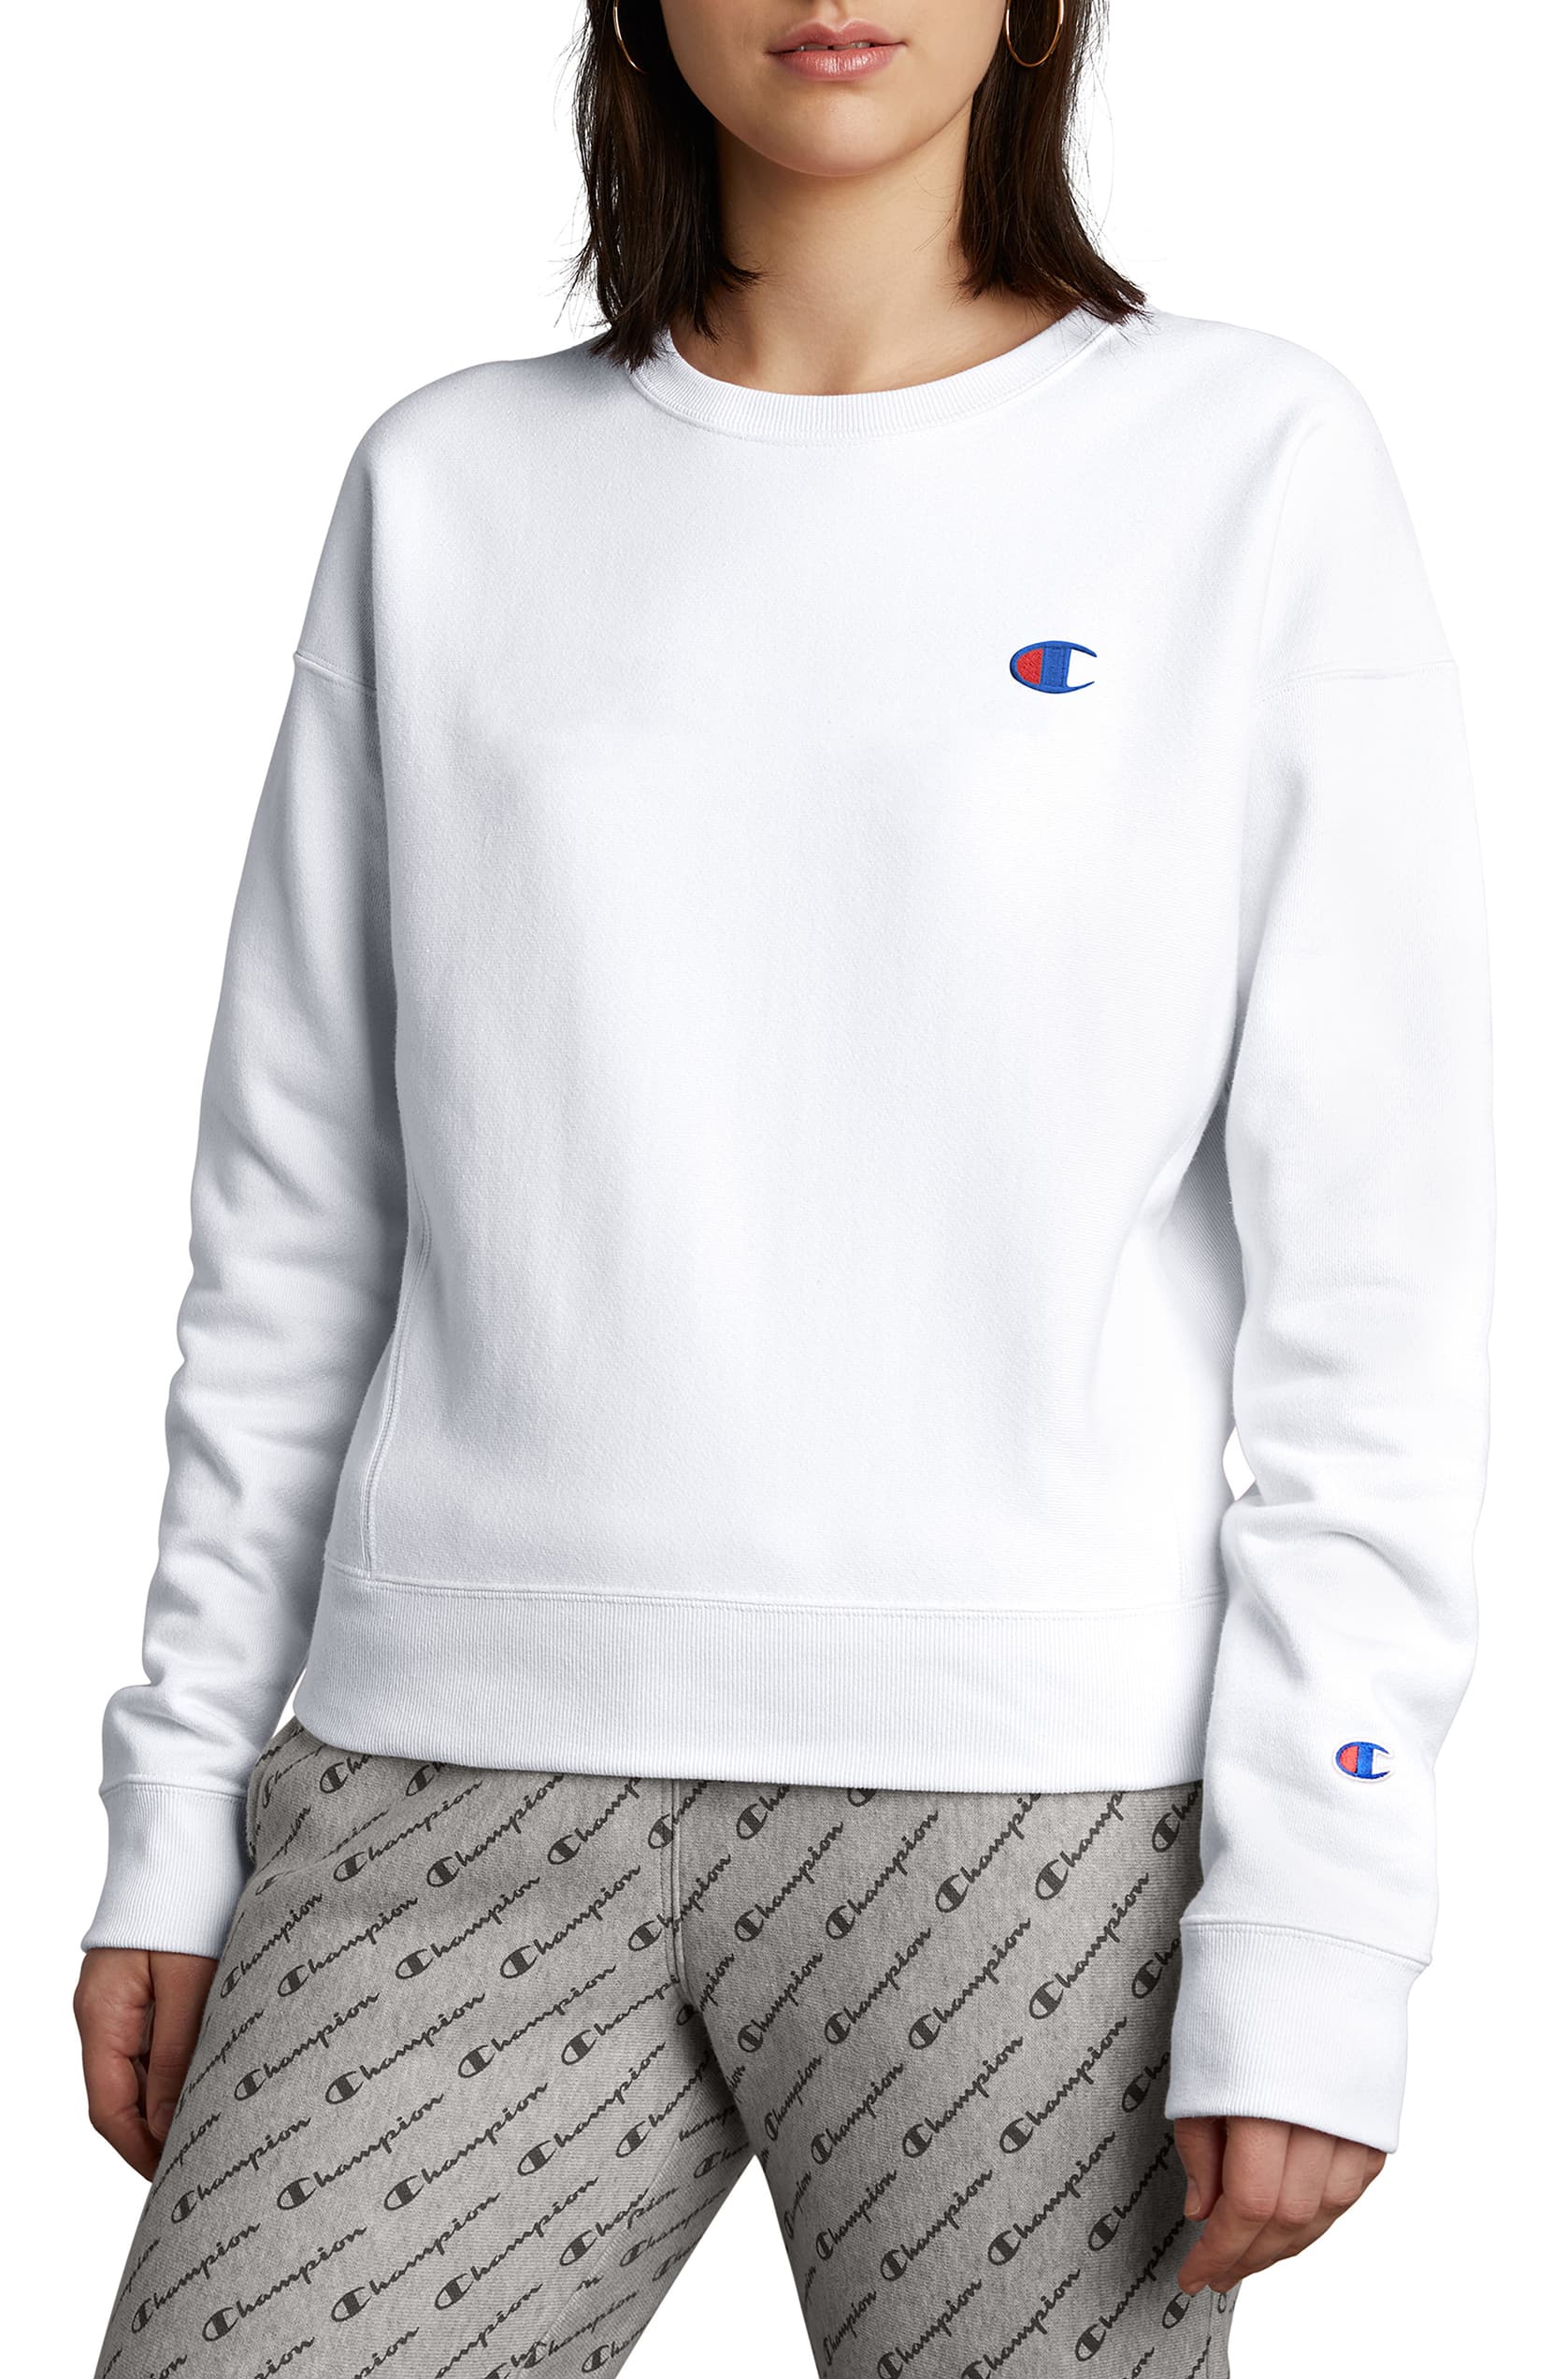 champion skirt outfit